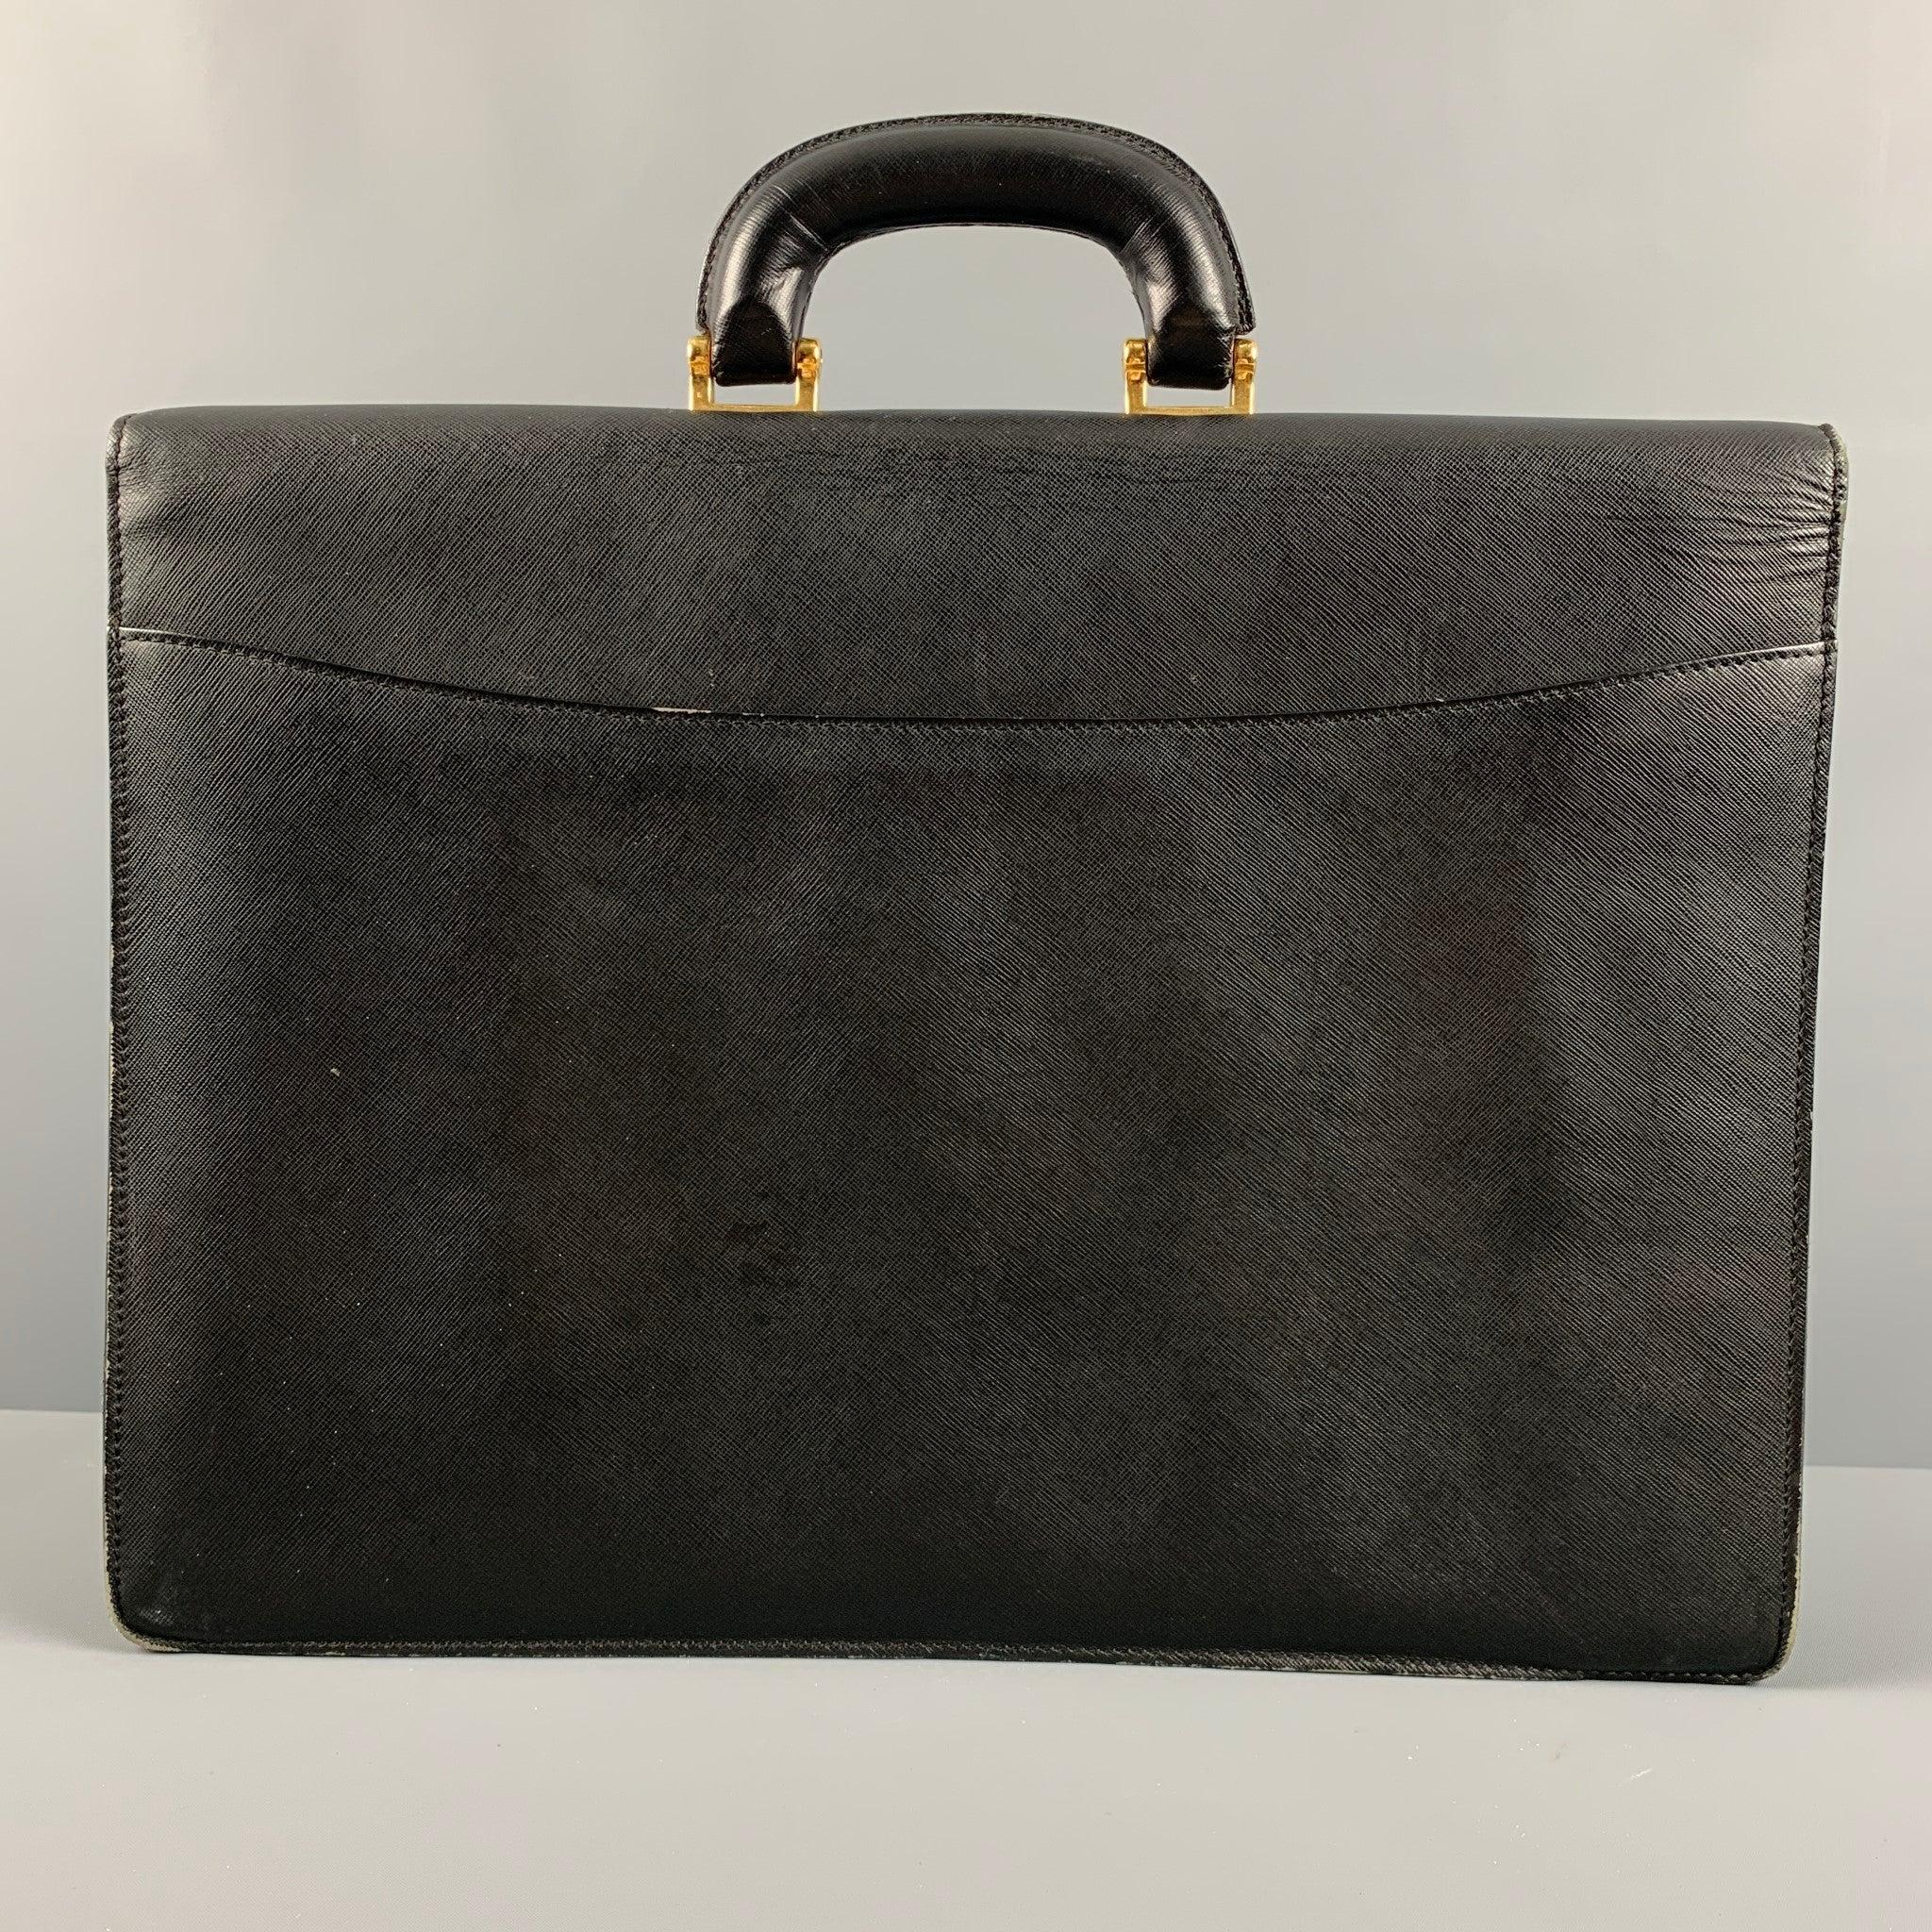 BALLY Black Leather Briefcase Bags In Good Condition For Sale In San Francisco, CA